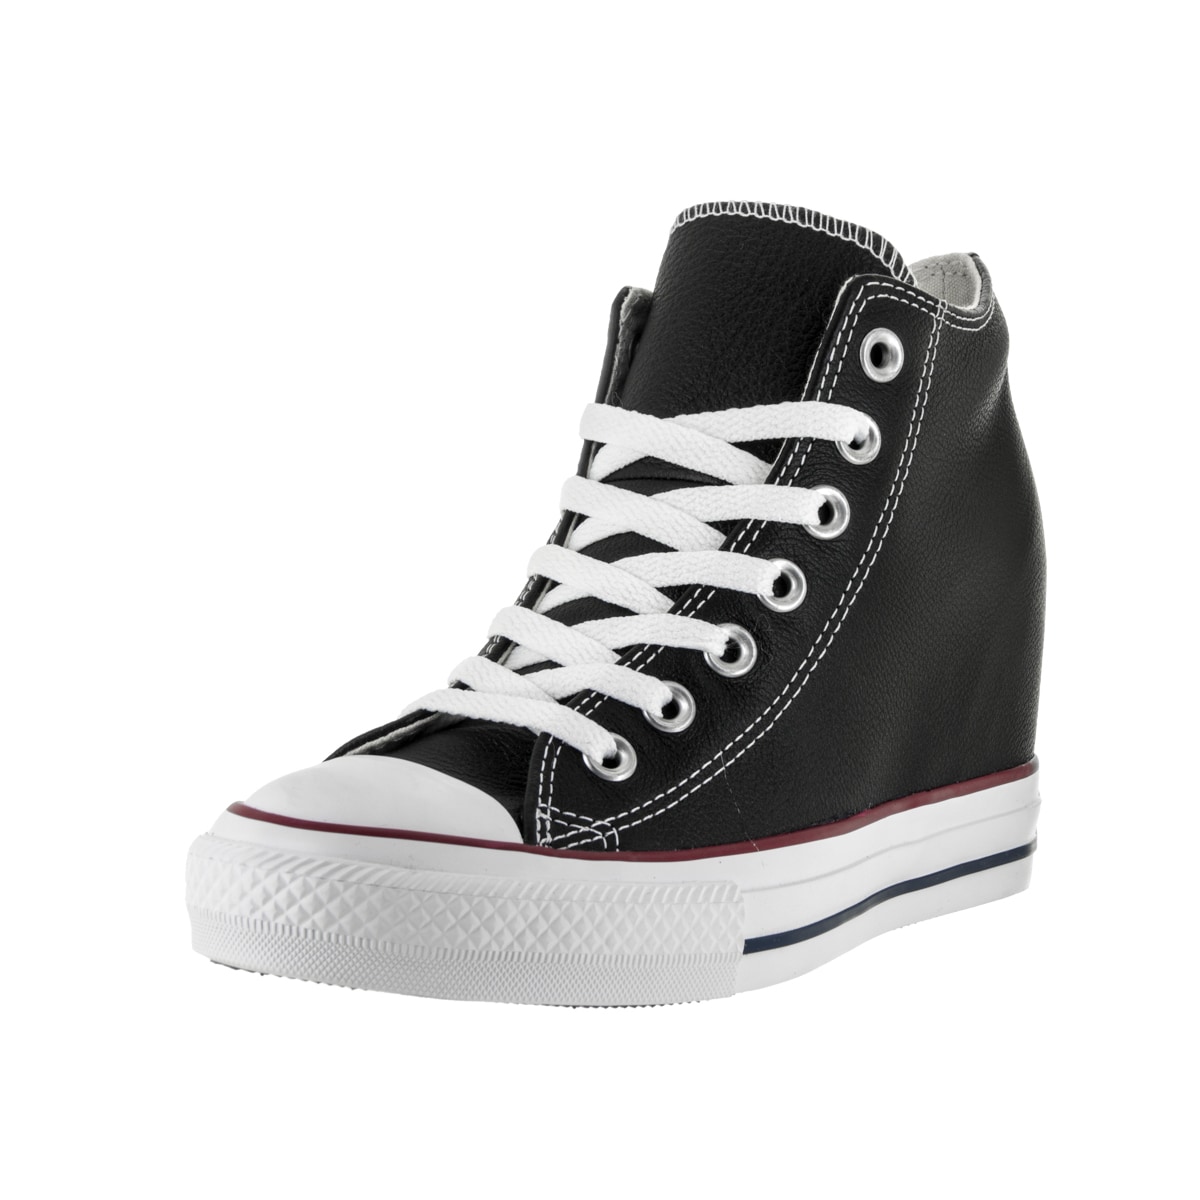 Shop Converse Women's Chuck Taylor Lux Mid Black Leather Casual Shoes -  Overstock - 13344321